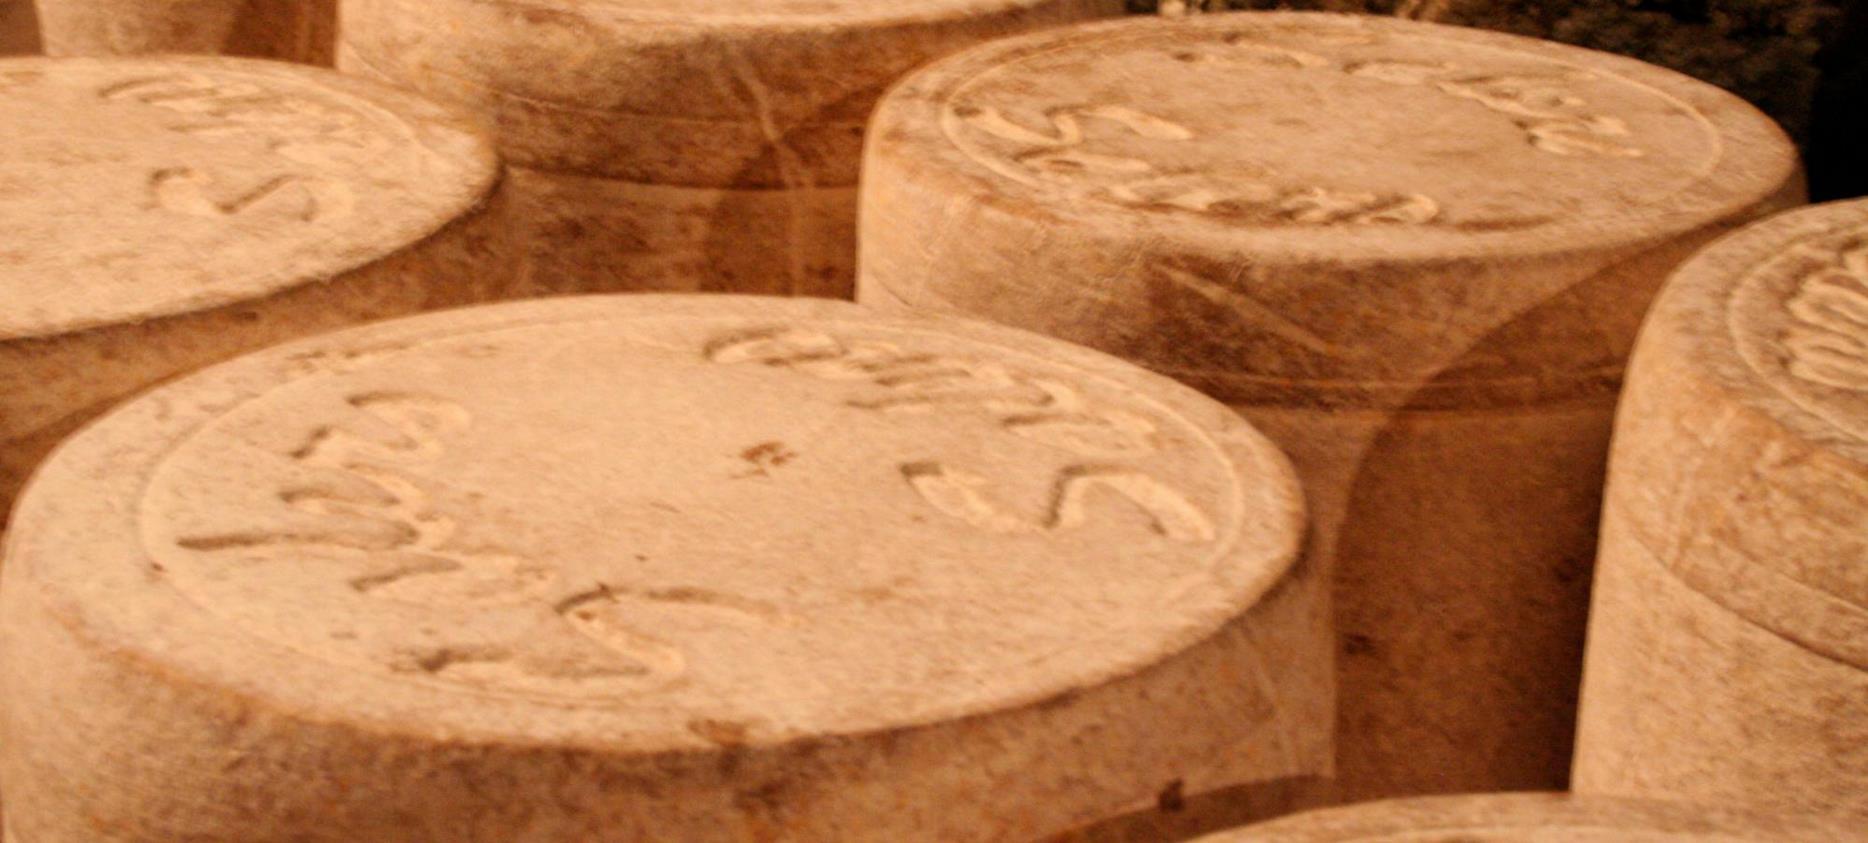 AOP Auvergne cheese - Salers ripening cellar